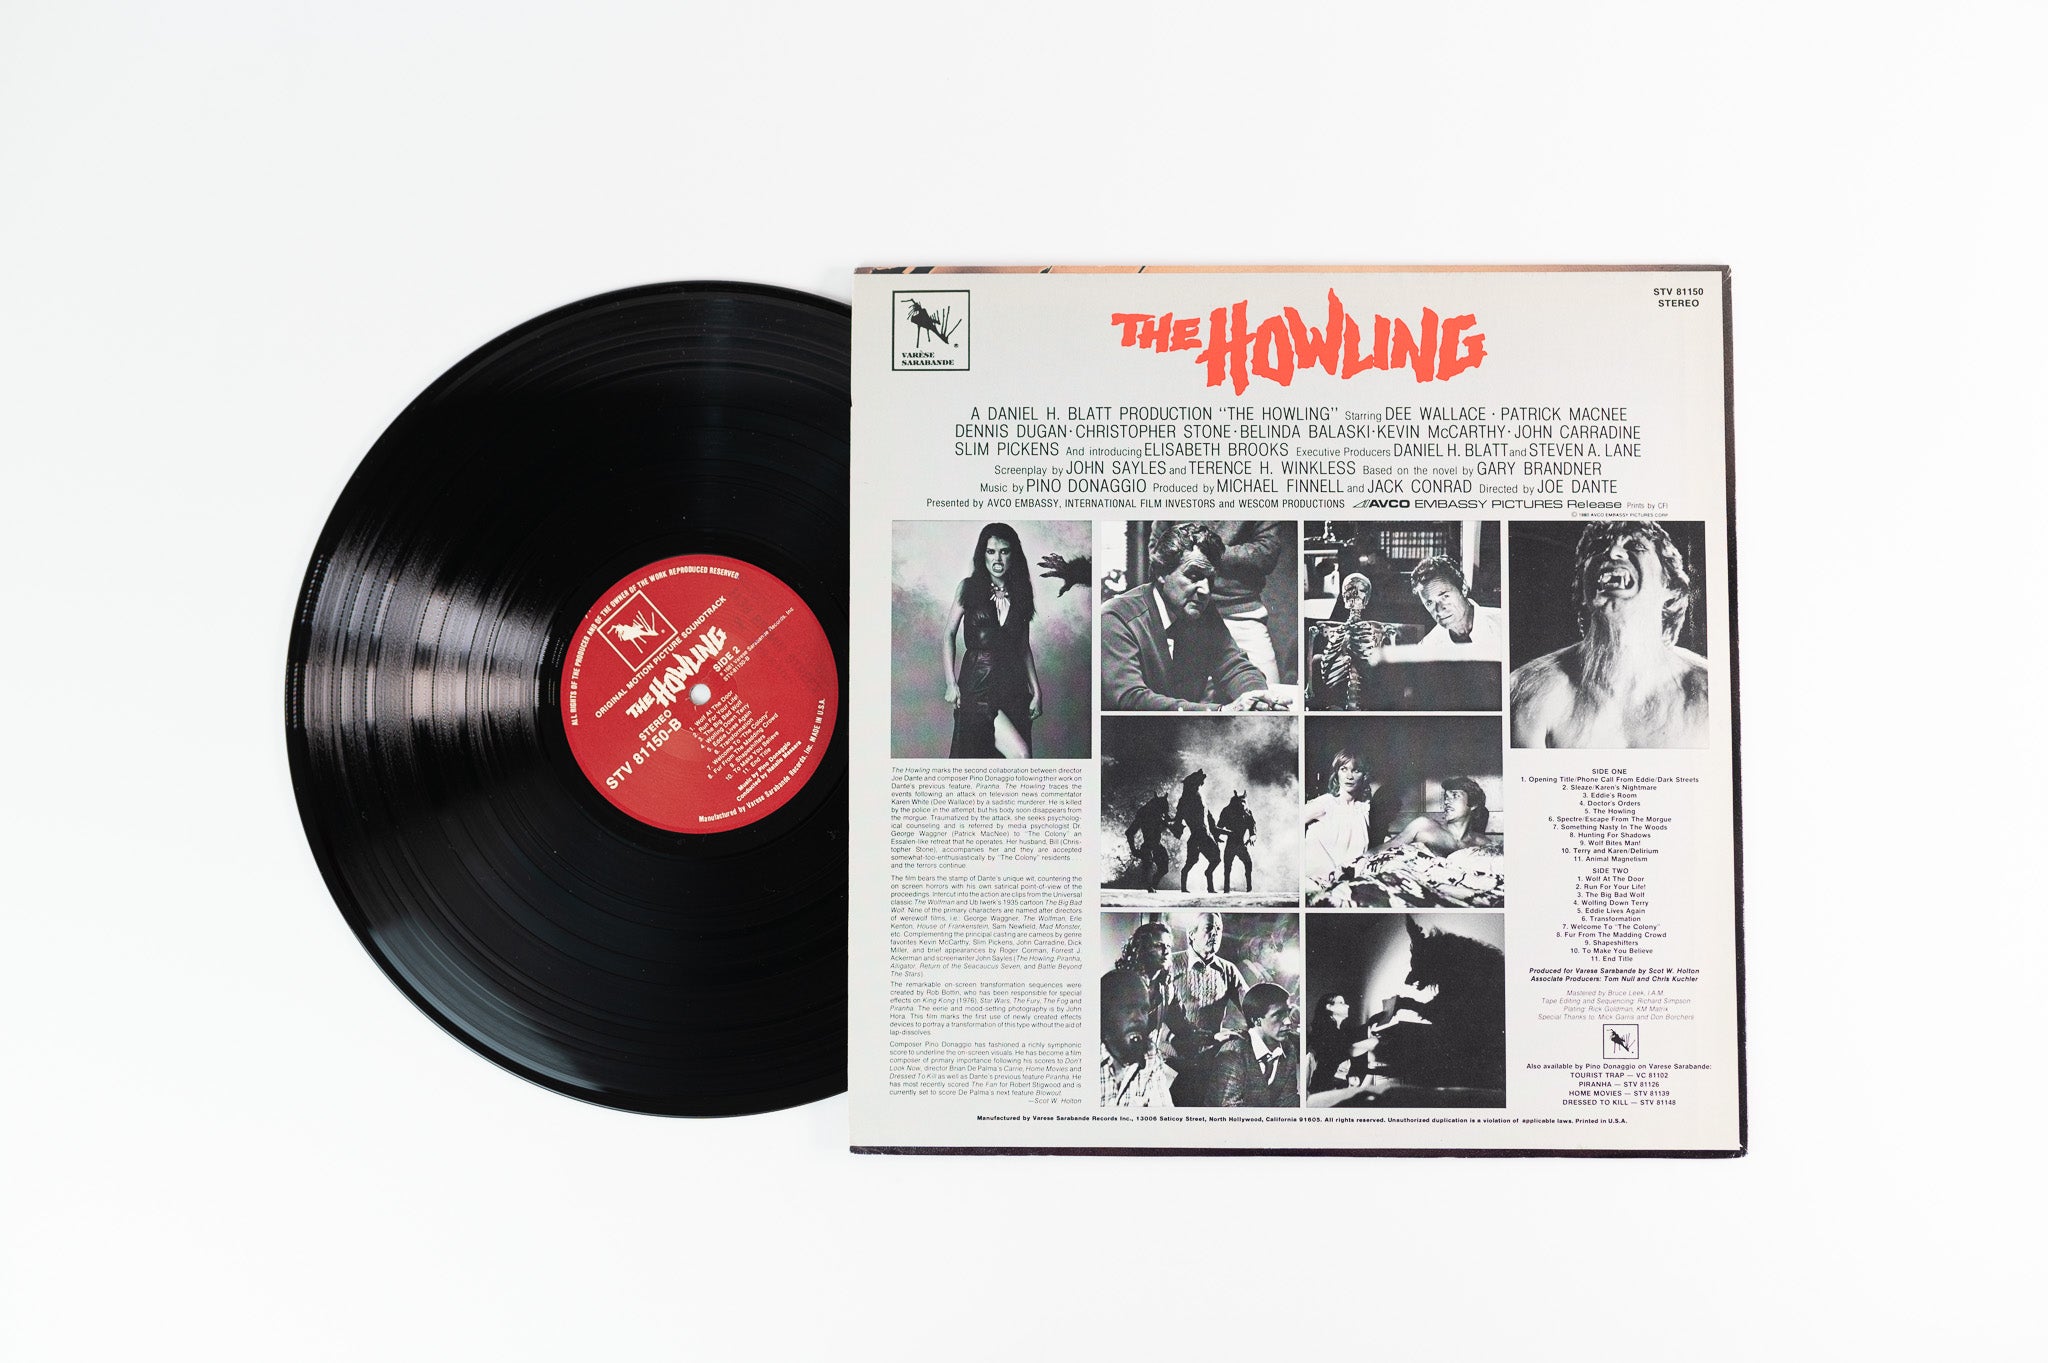 Pino Donaggio - The Howling (Original Motion Picture Soundtrack) on Varese Sarabande